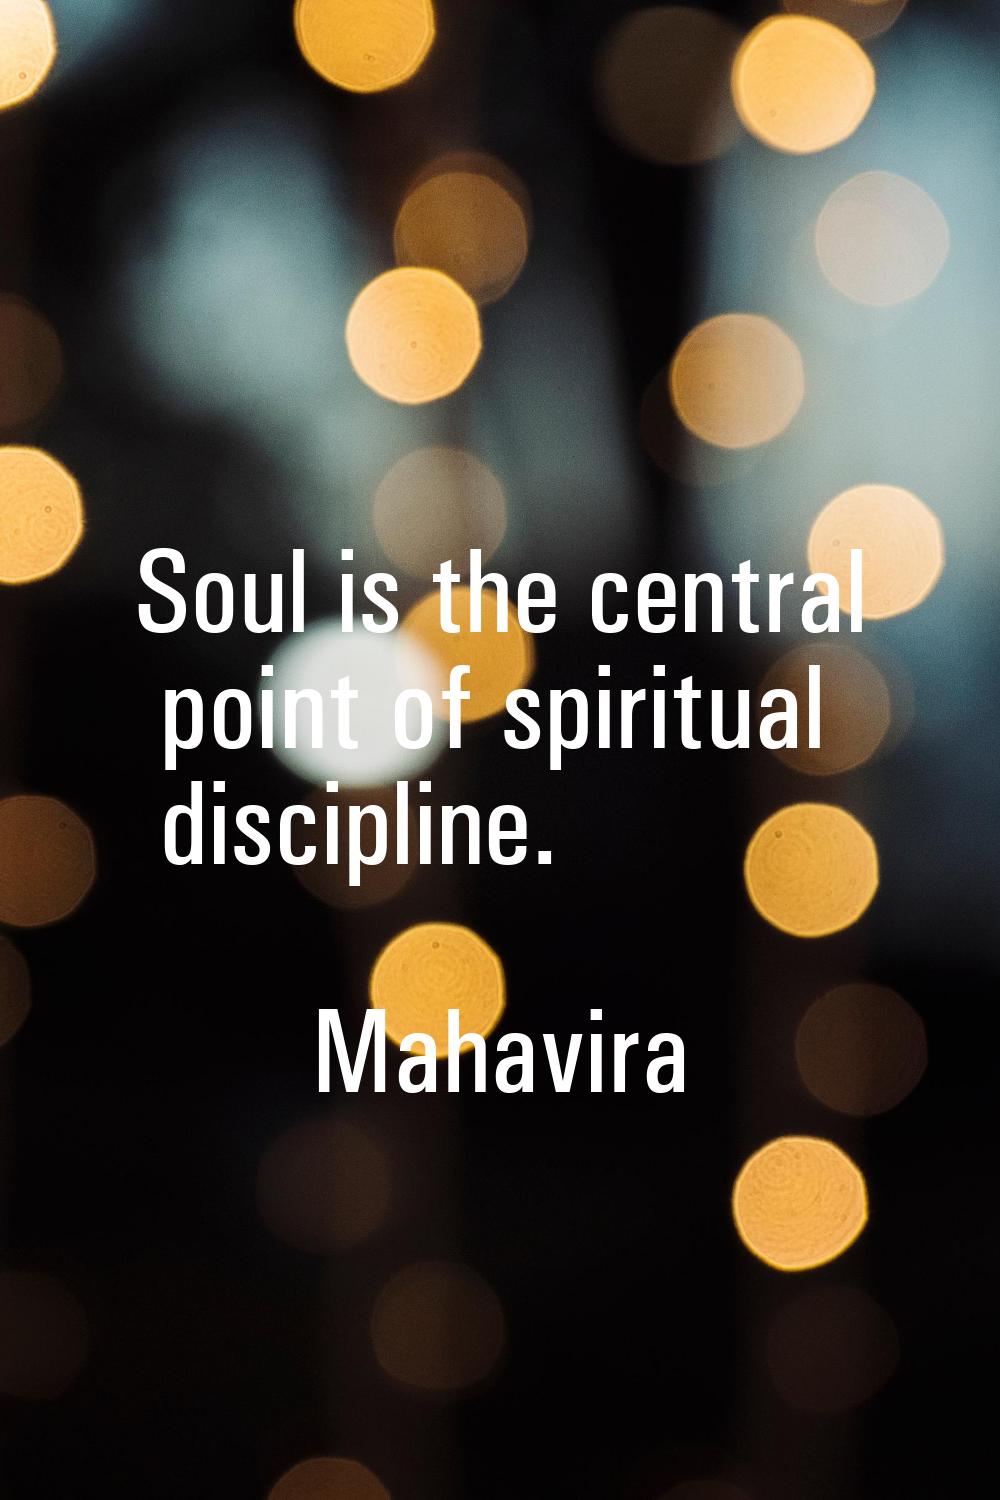 Soul is the central point of spiritual discipline.